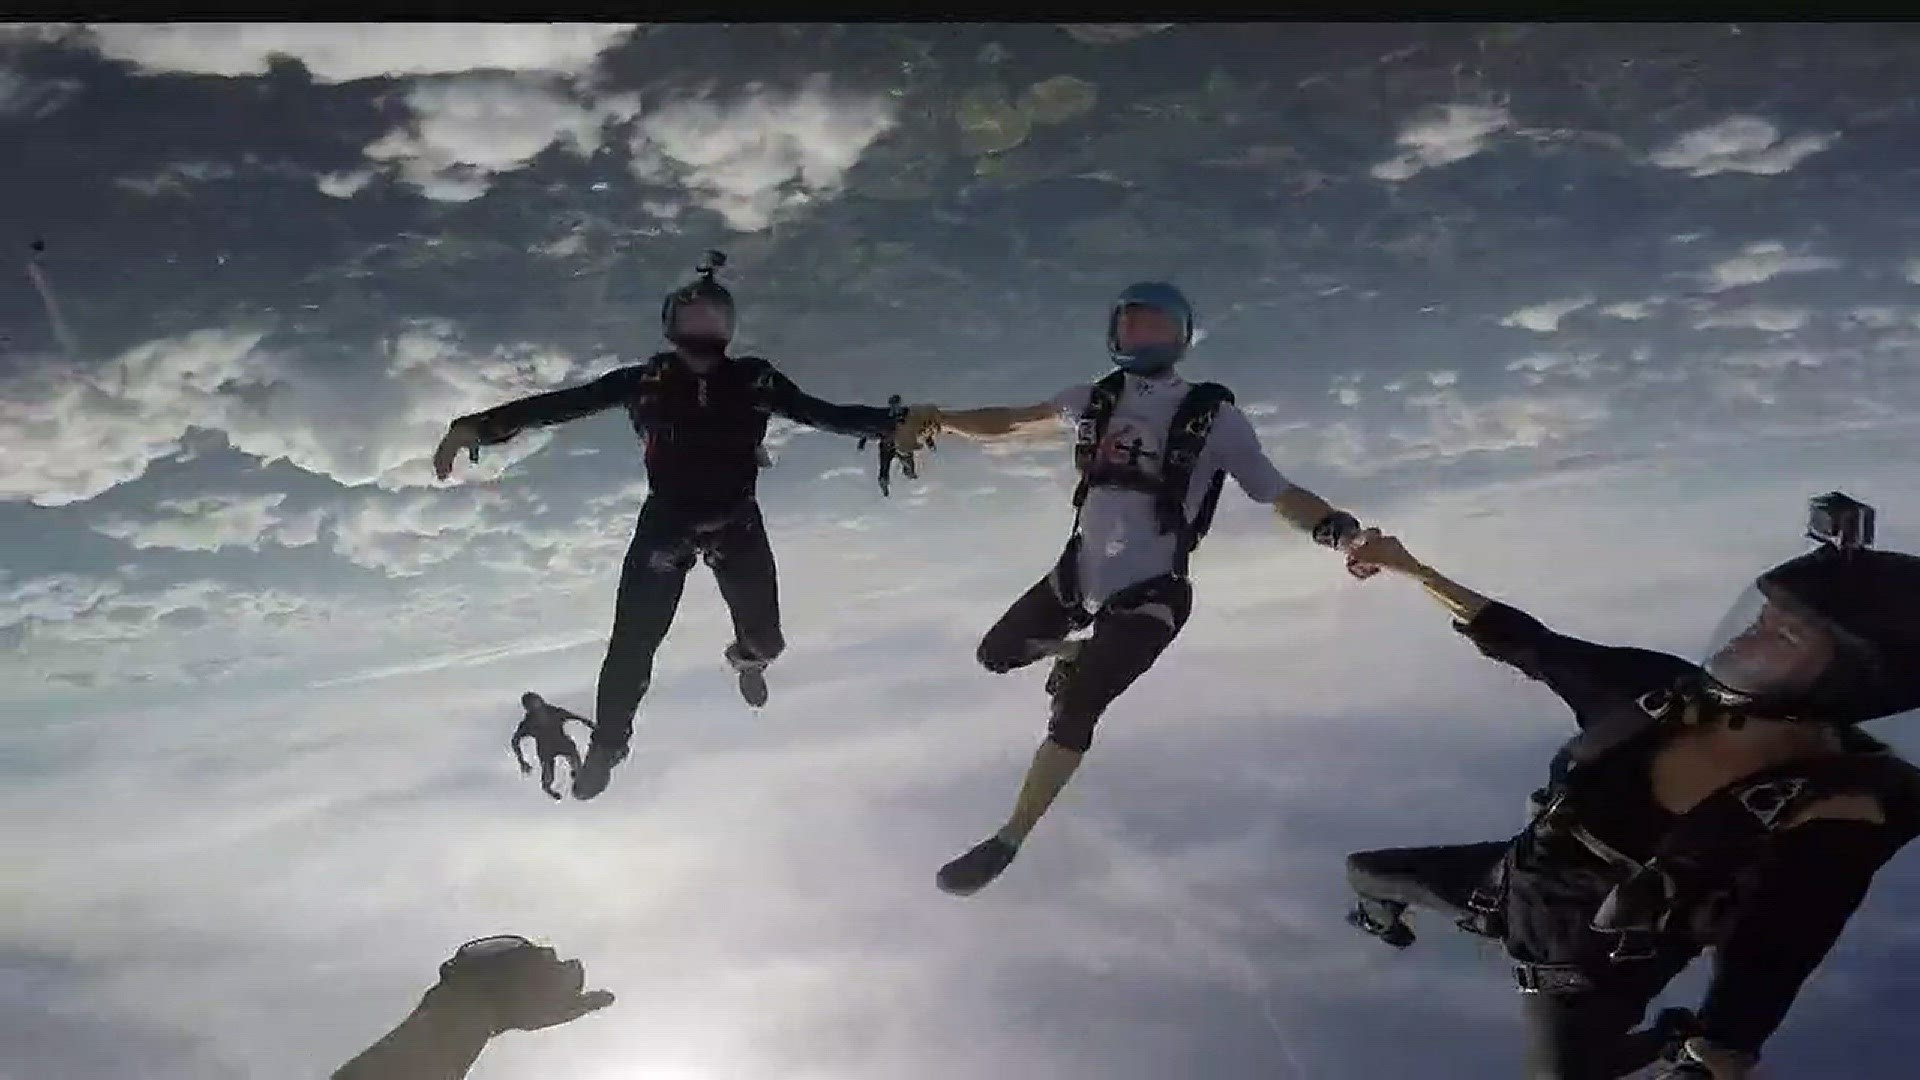 It's an extreme sport that attracts the bravest athletes and risk takers - talking about skydiving.